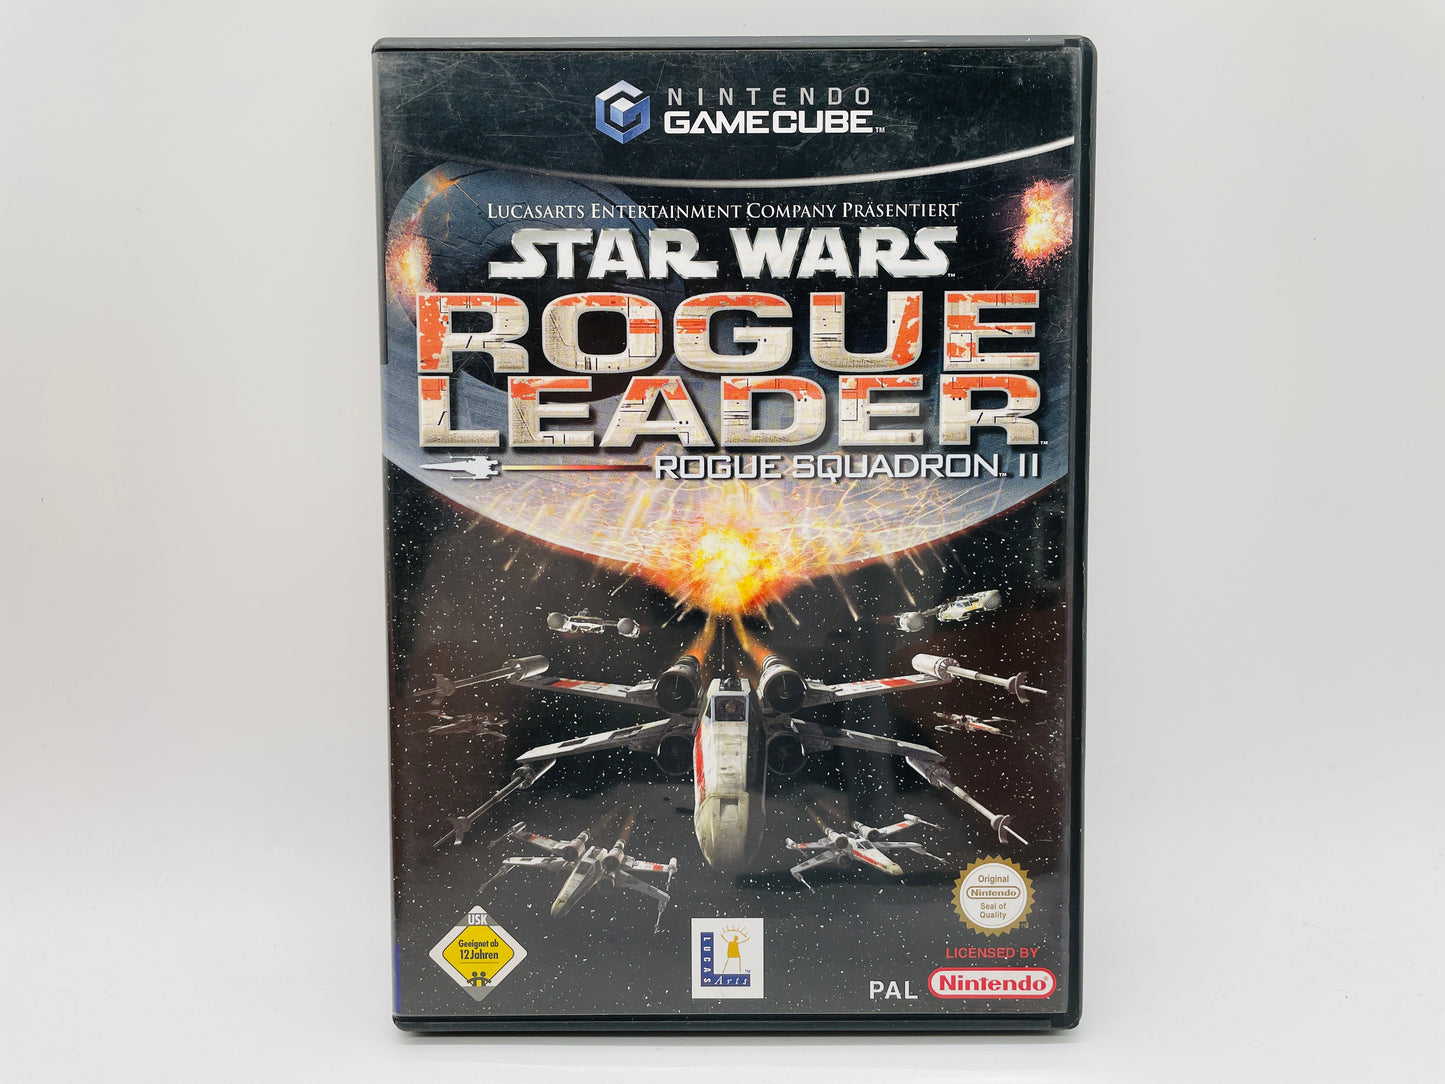 Star Wars Rogue Leader Rogue Squadron II [GCN]